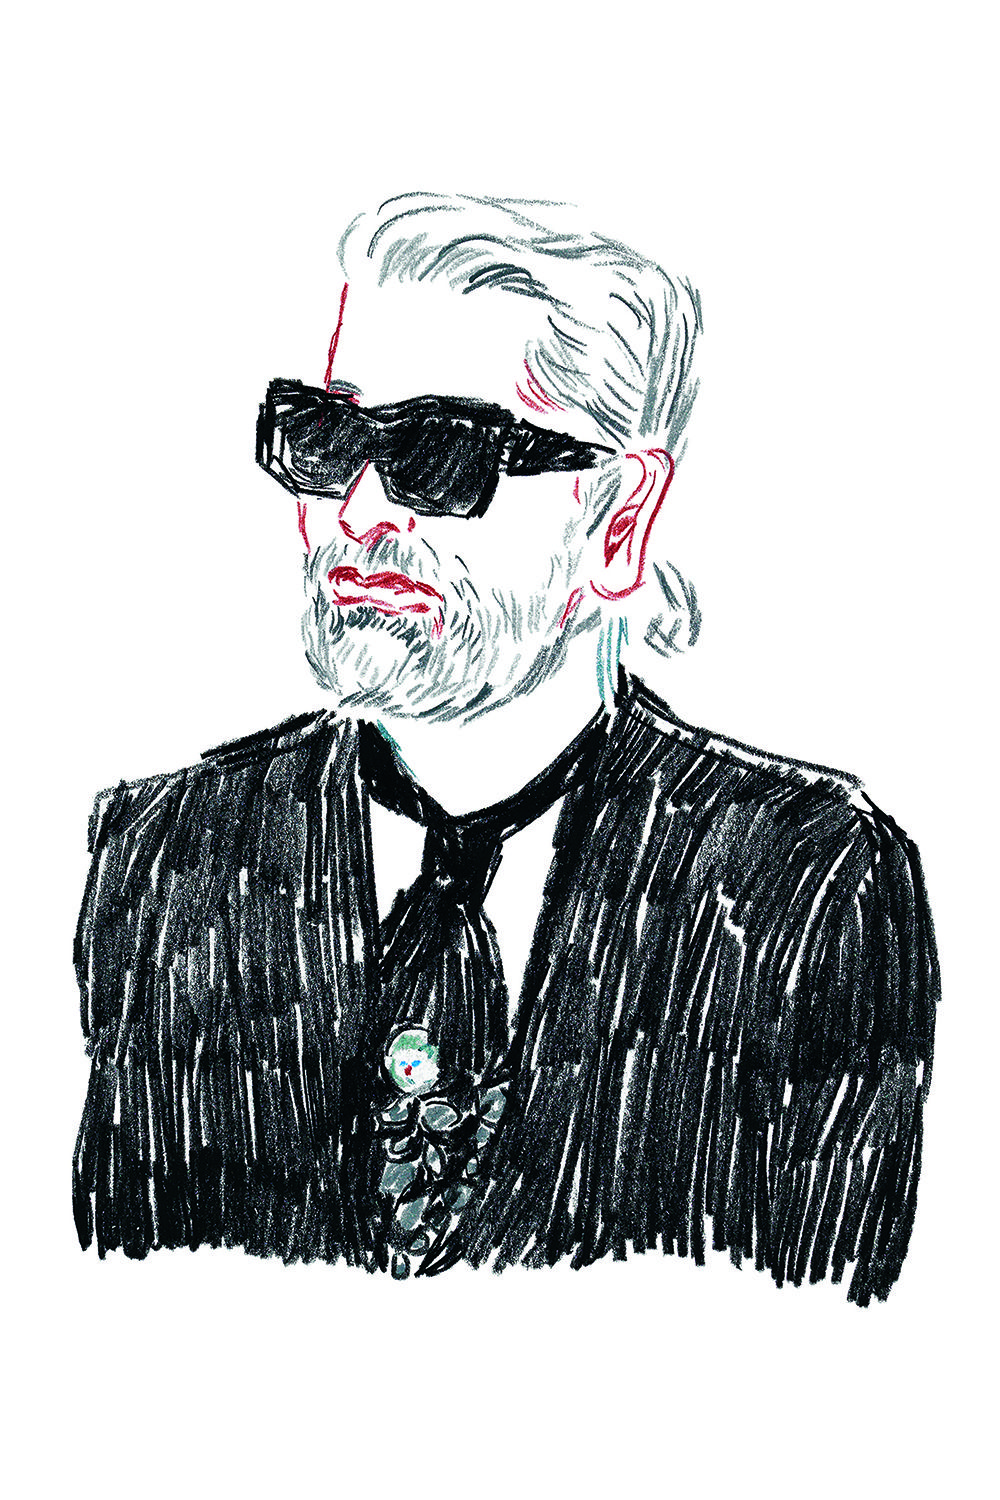 CHANEL Twitterren Invitation sketch by Karl Lagerfeld for the CHANEL  Cruise fashion show in Singapore on May 9th httptcoOaDNcn6h85  X